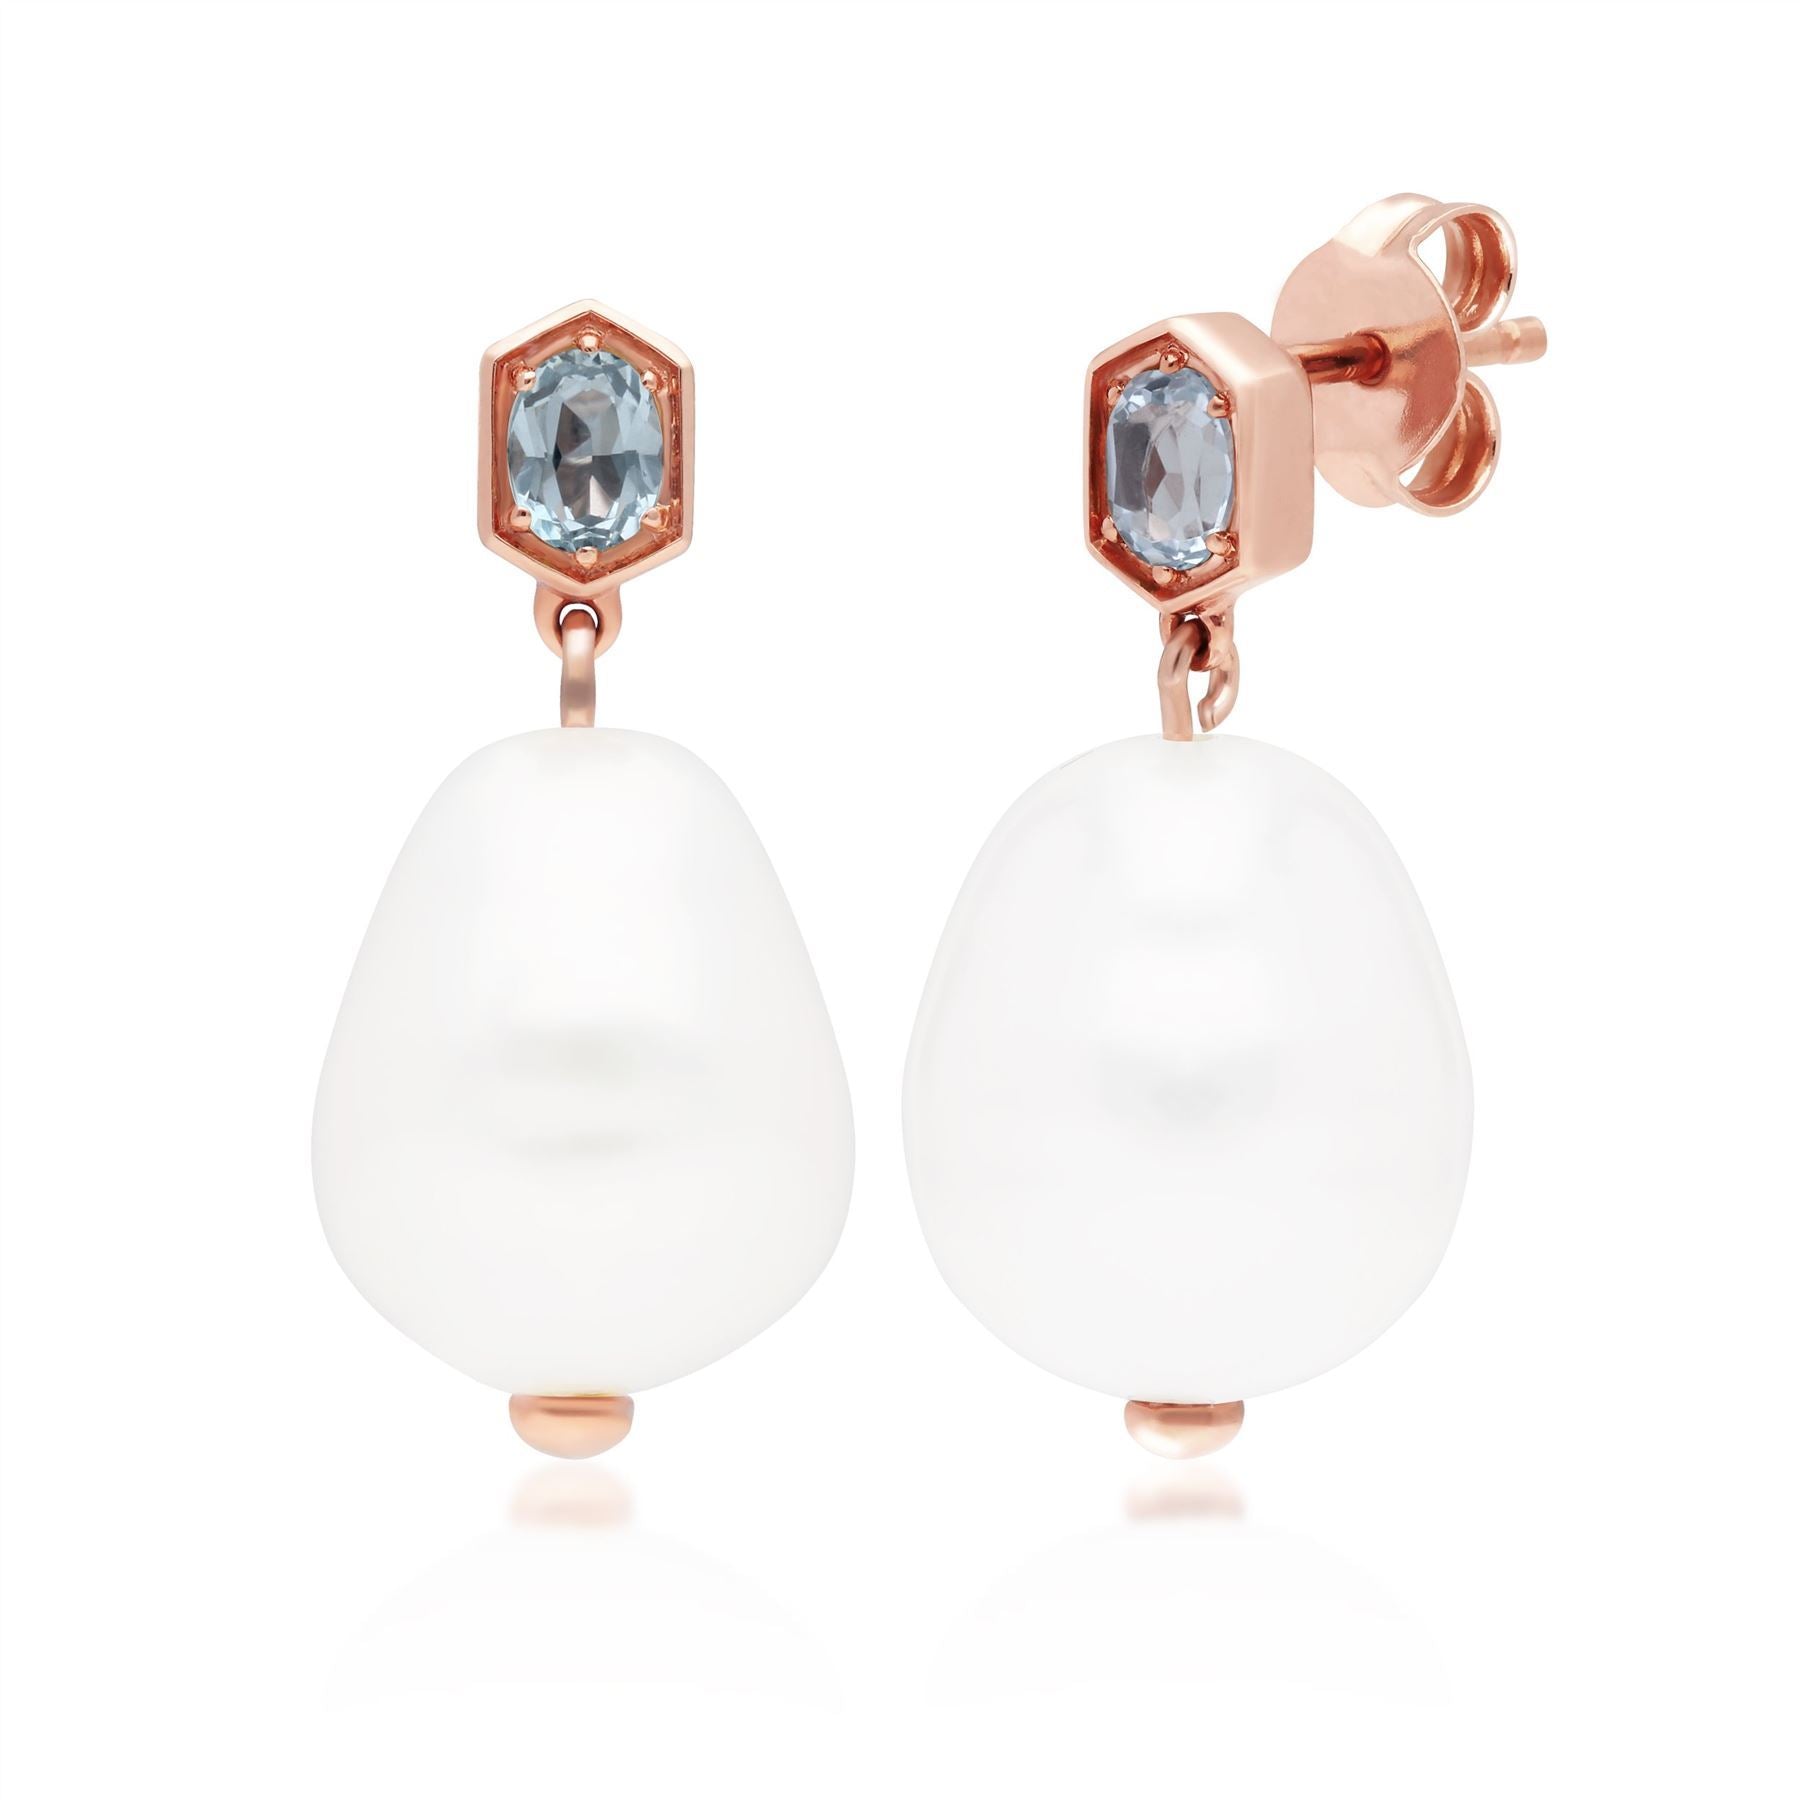 Modern Baroque Pearl & Topaz Drop Earrings in Rose Gold Plated Sterling Silver